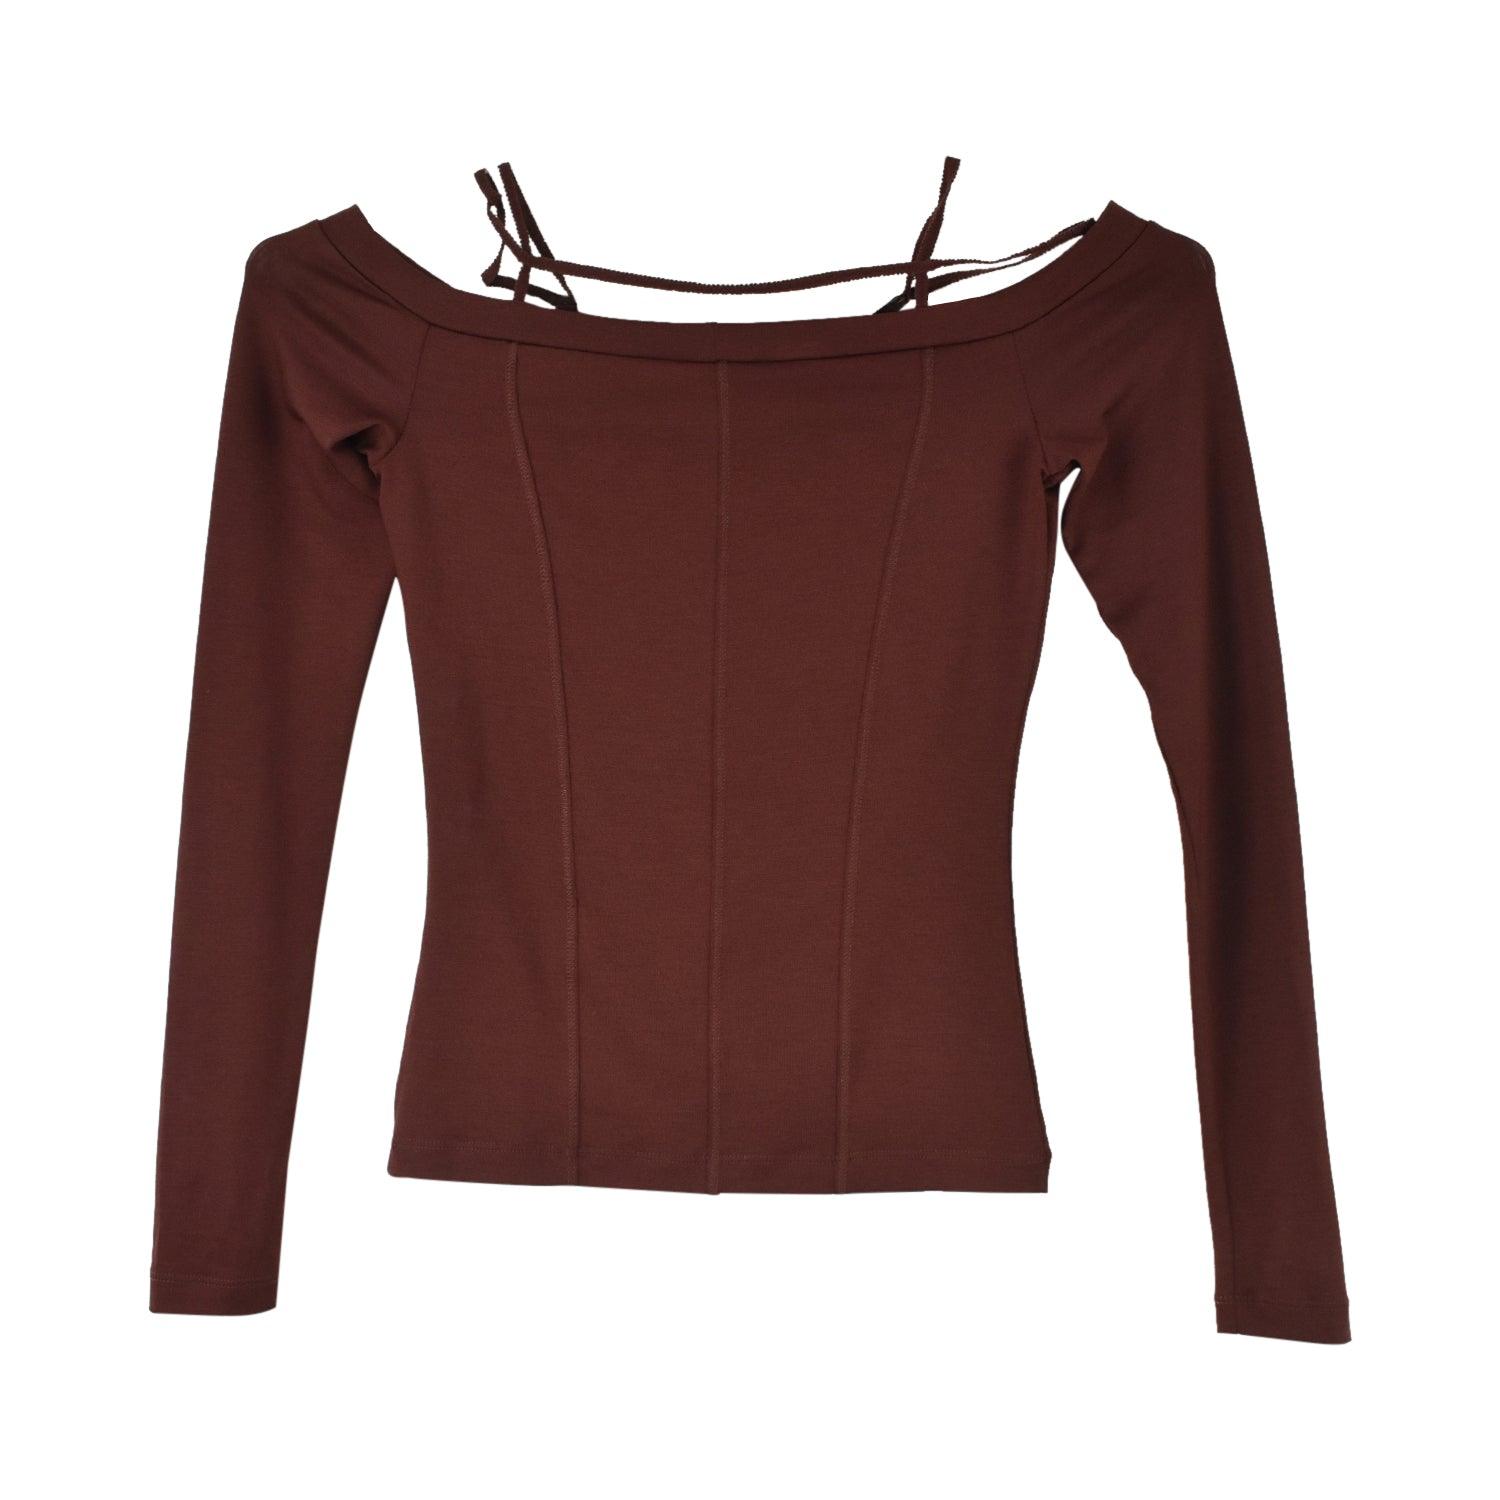 Jacquemus Top - Women's XXS - KAT HOLD - Fashionably Yours